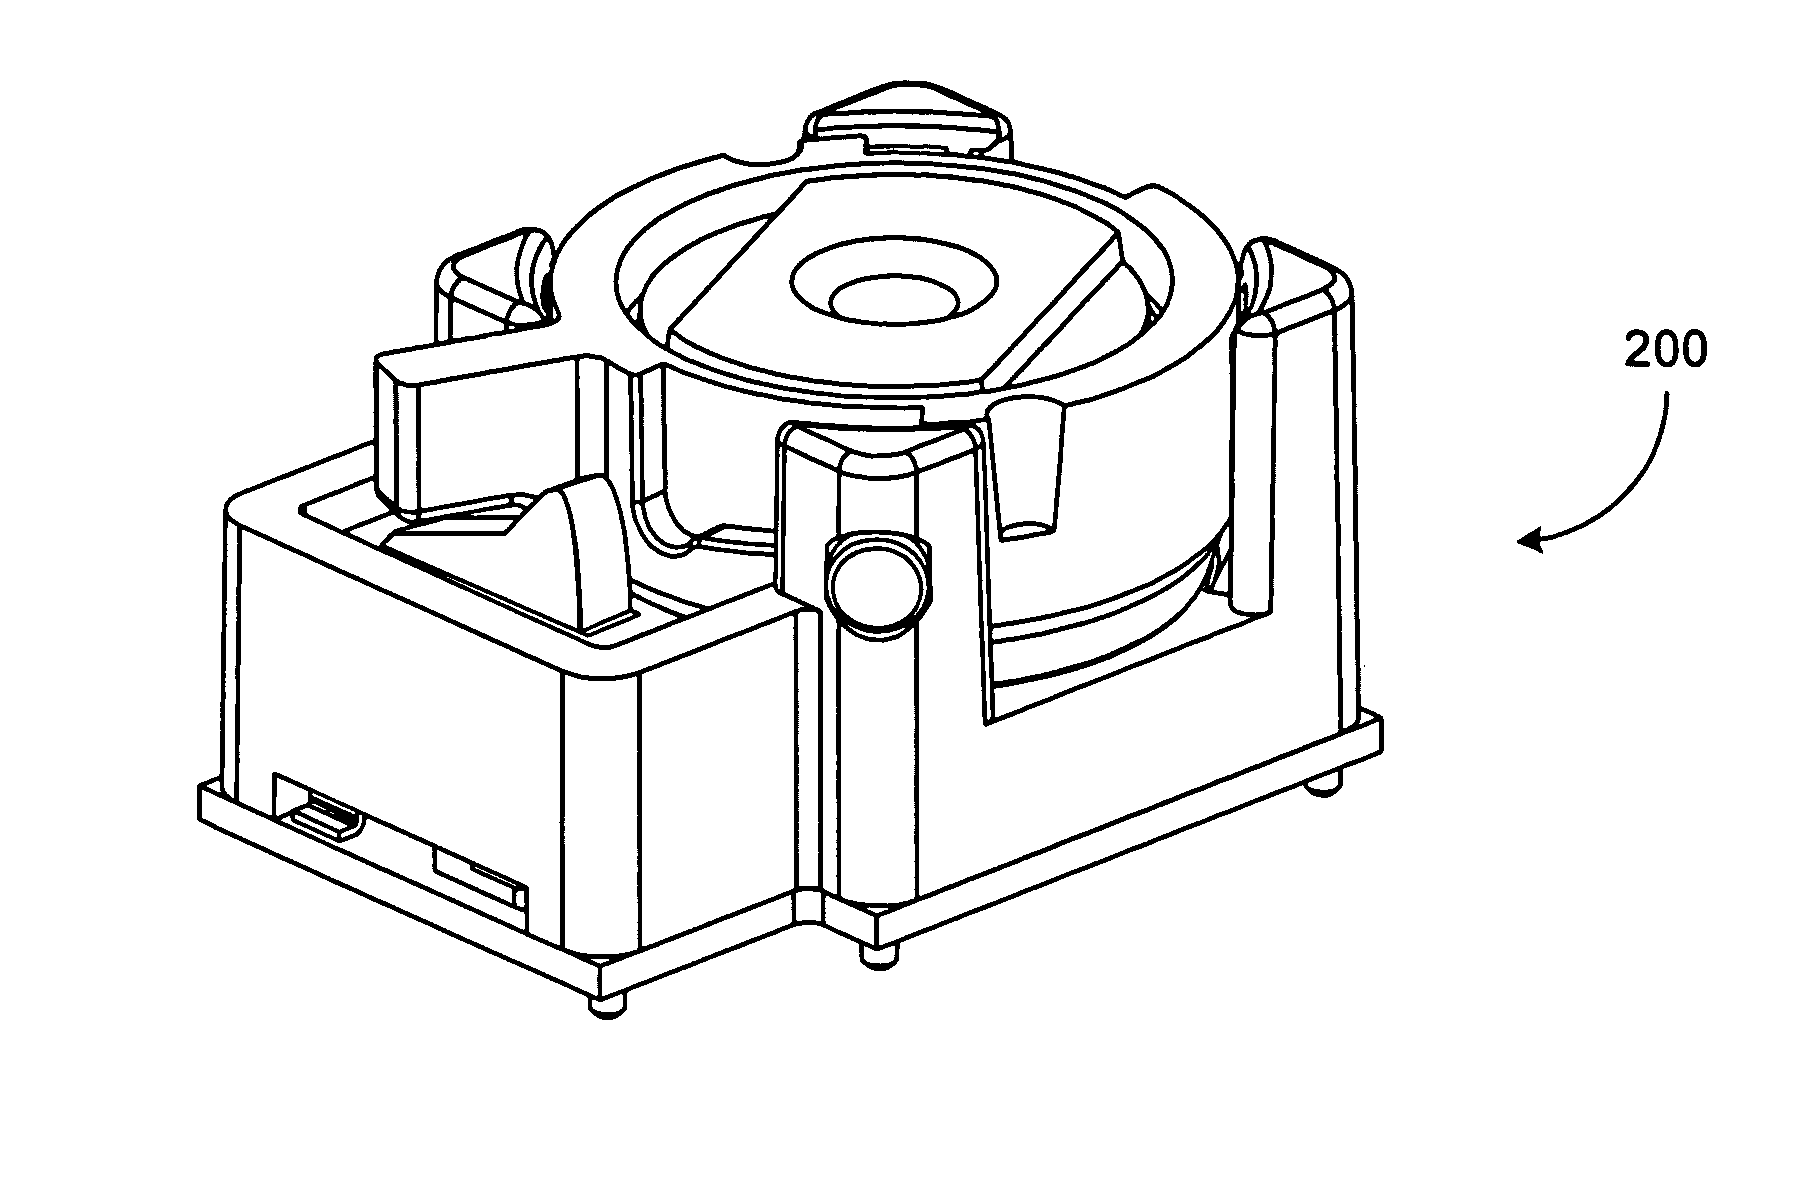 Micro camera module with discrete manual focal positions